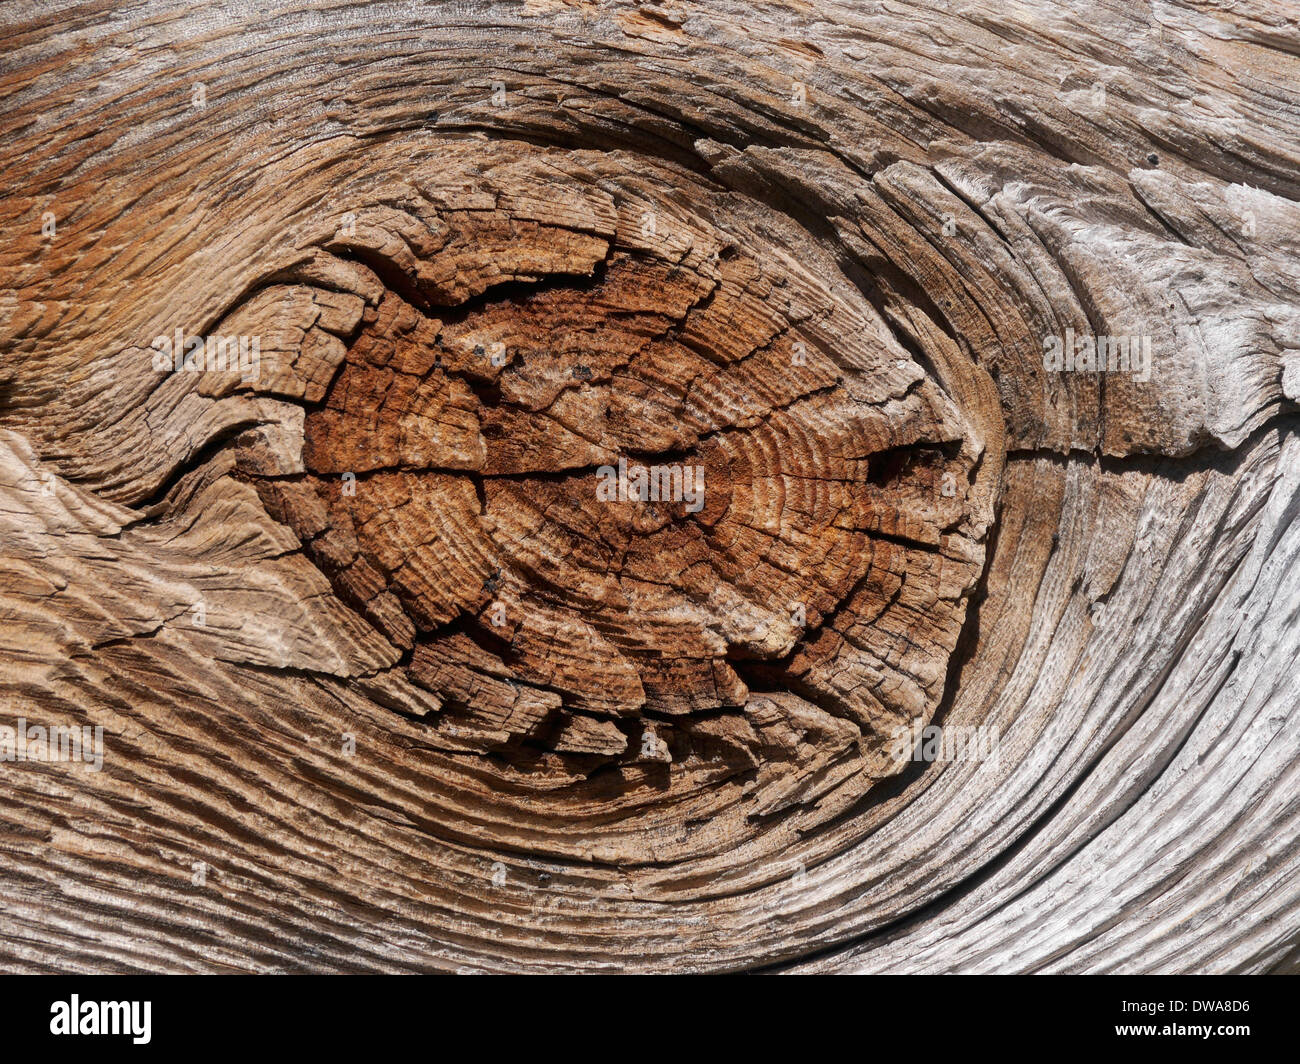 Wood With Knot High Resolution Stock Photography and Images - Alamy